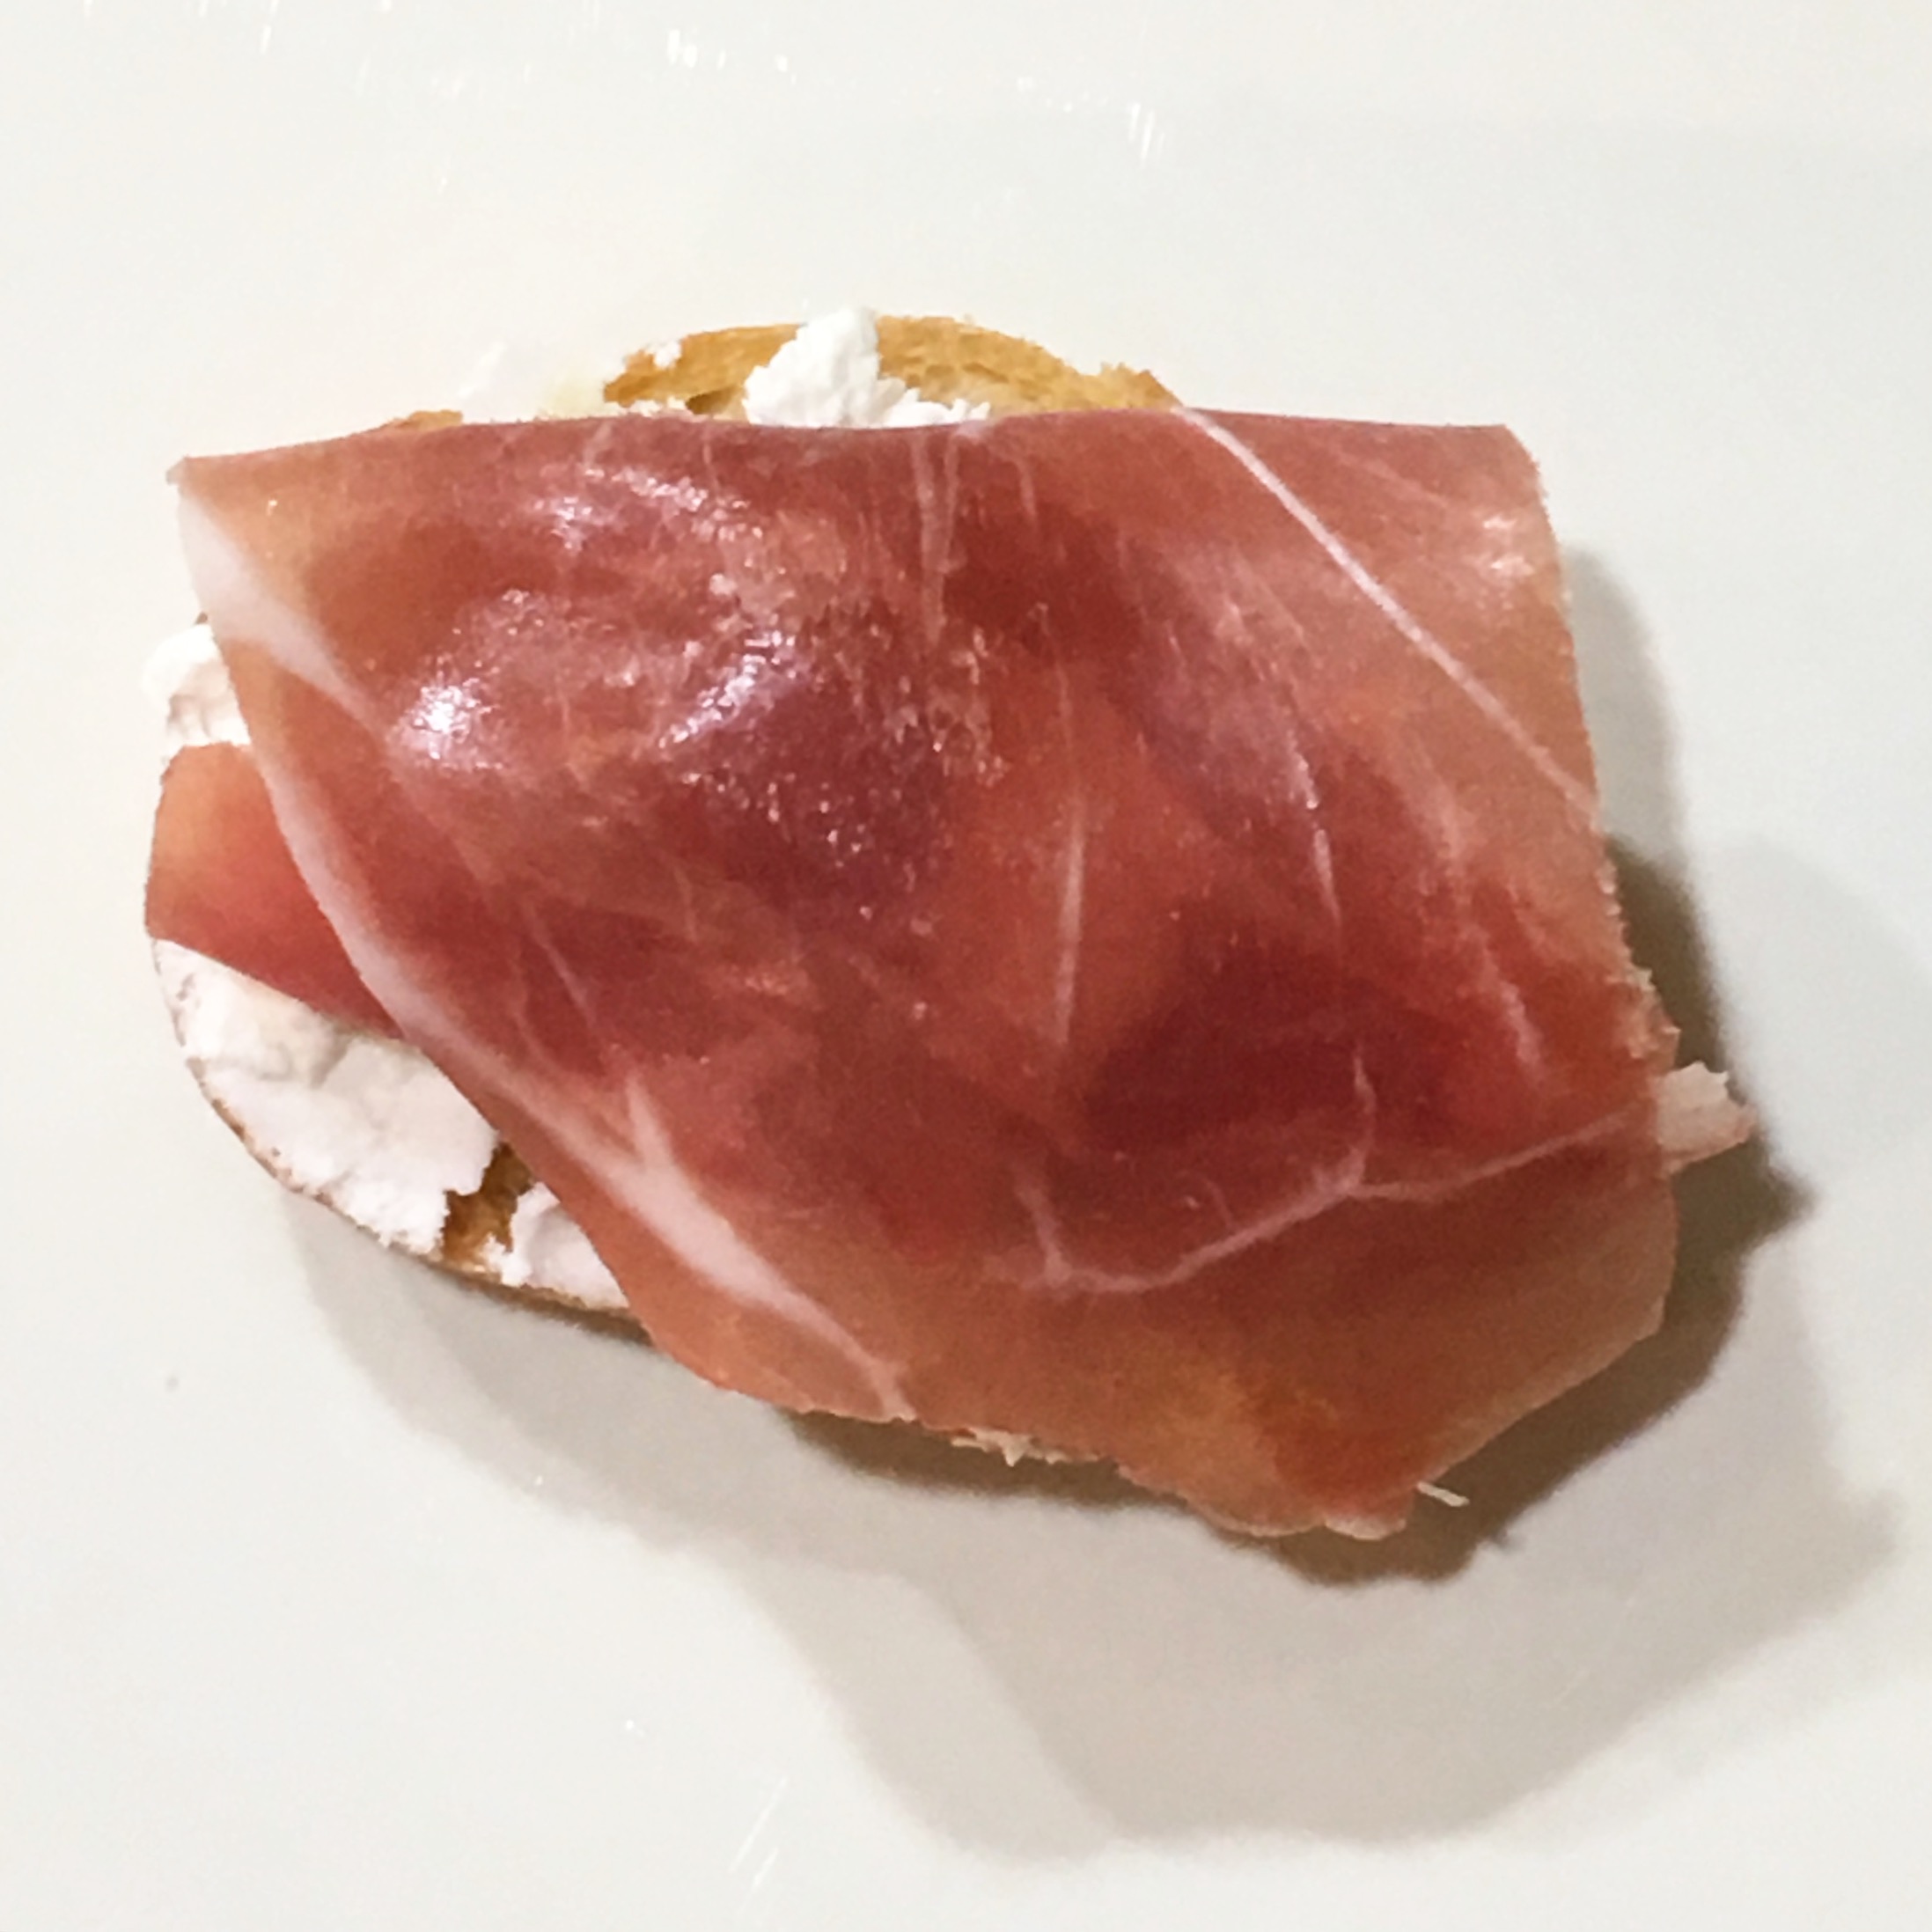 Prosciutto on Goat Cheese